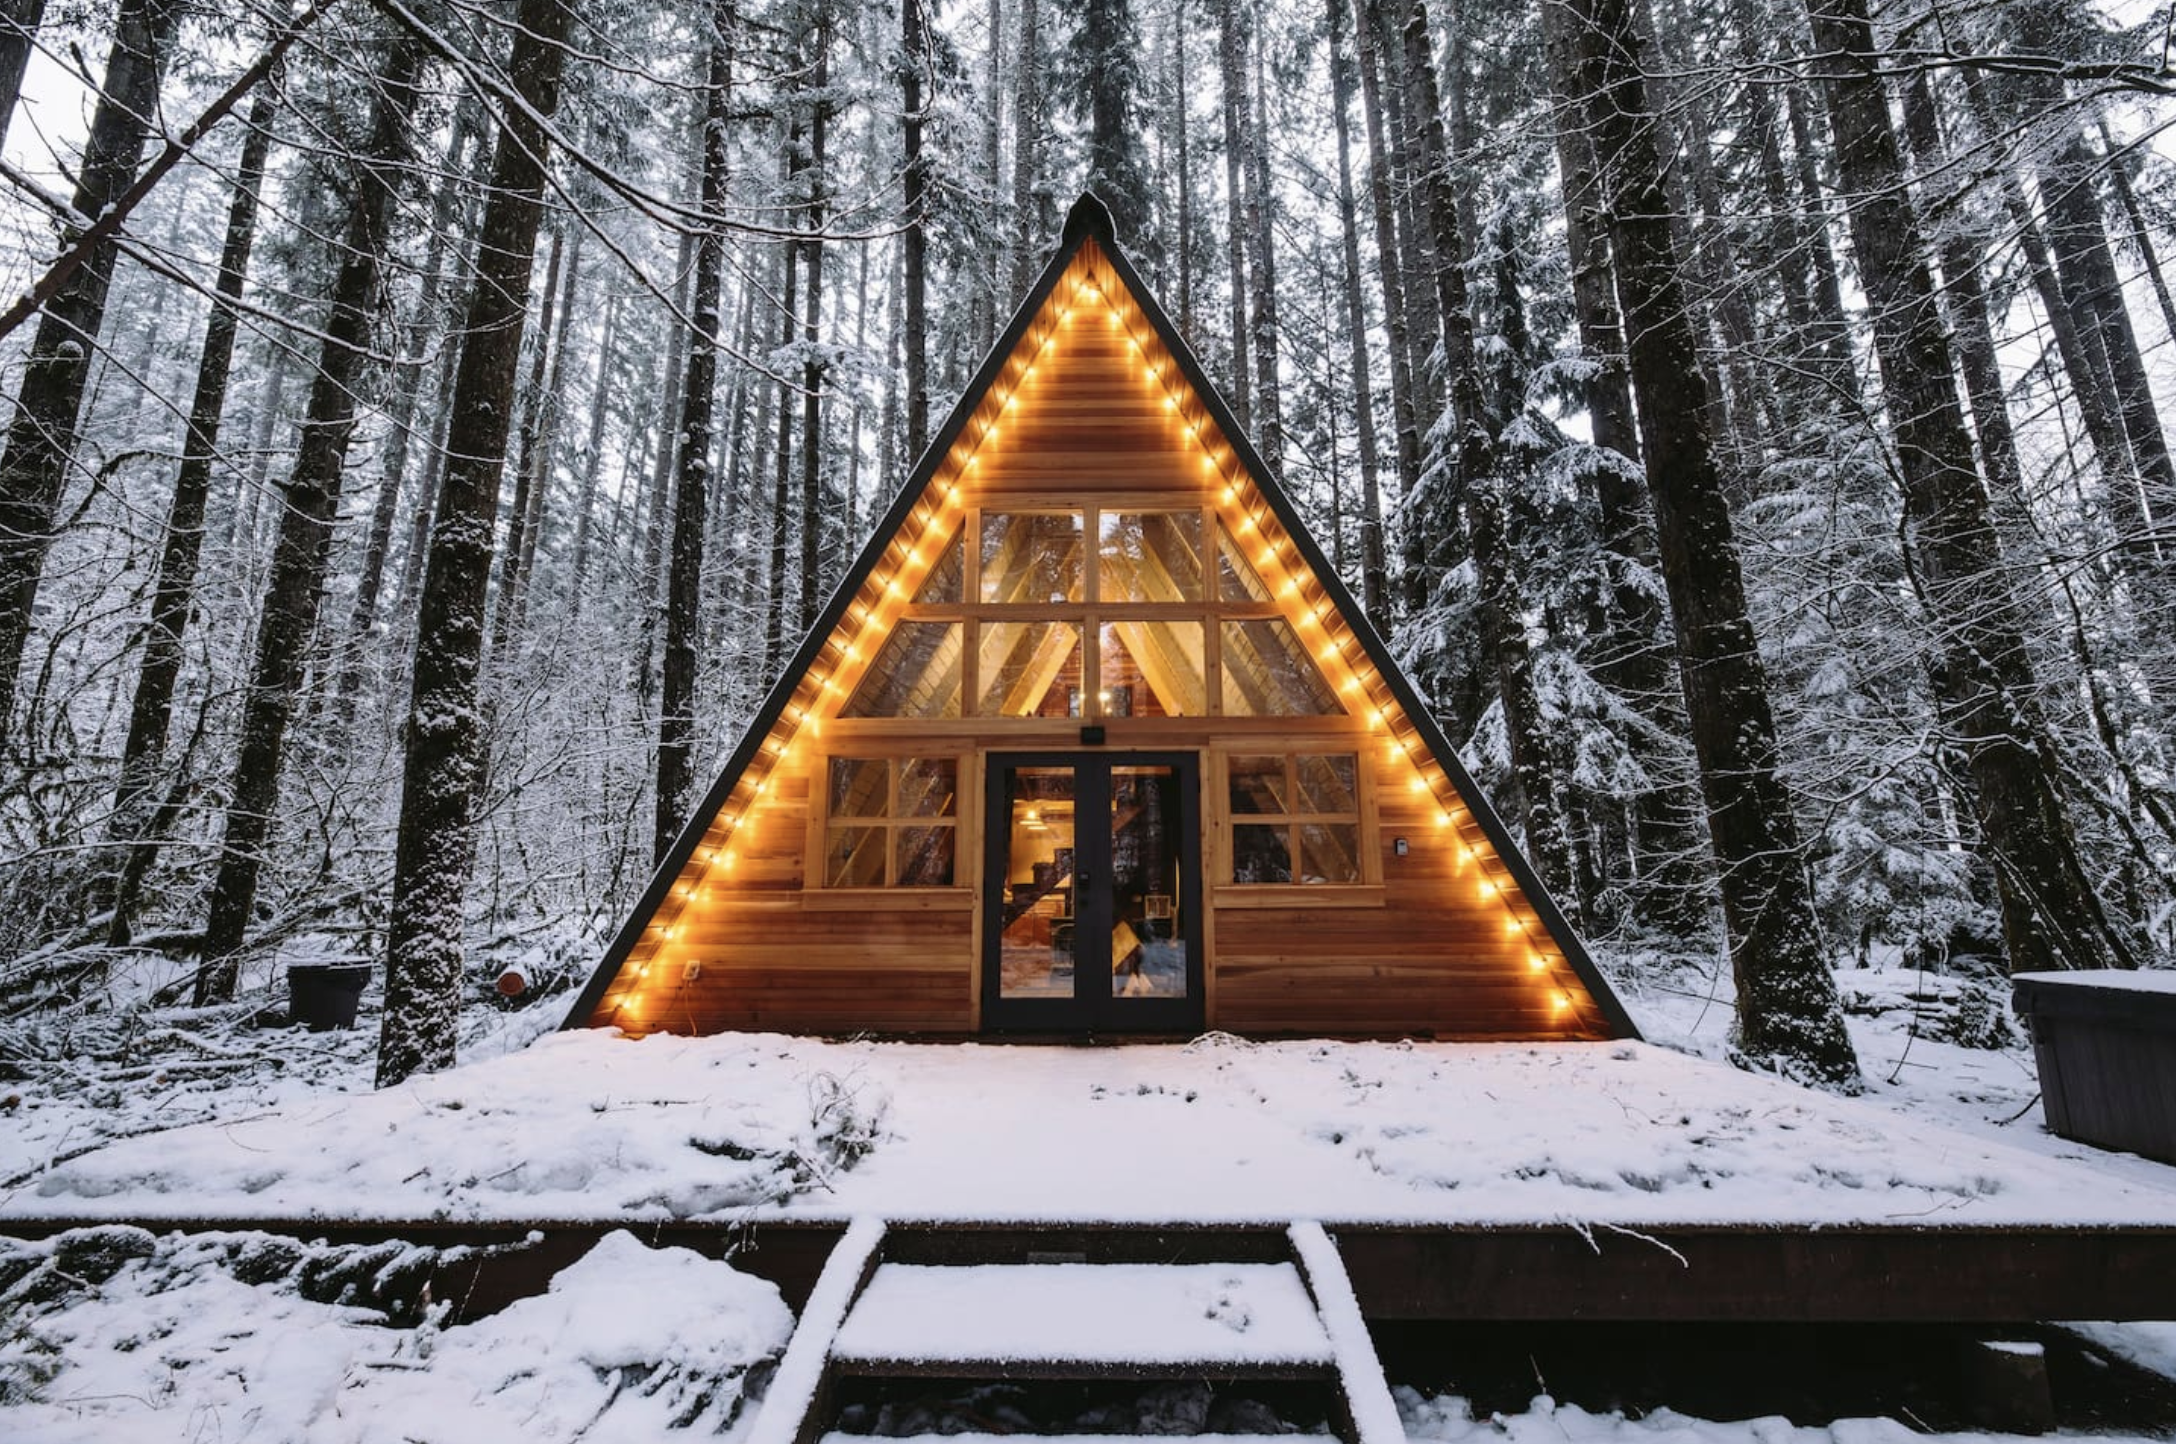 A Frame Cabin in the snow